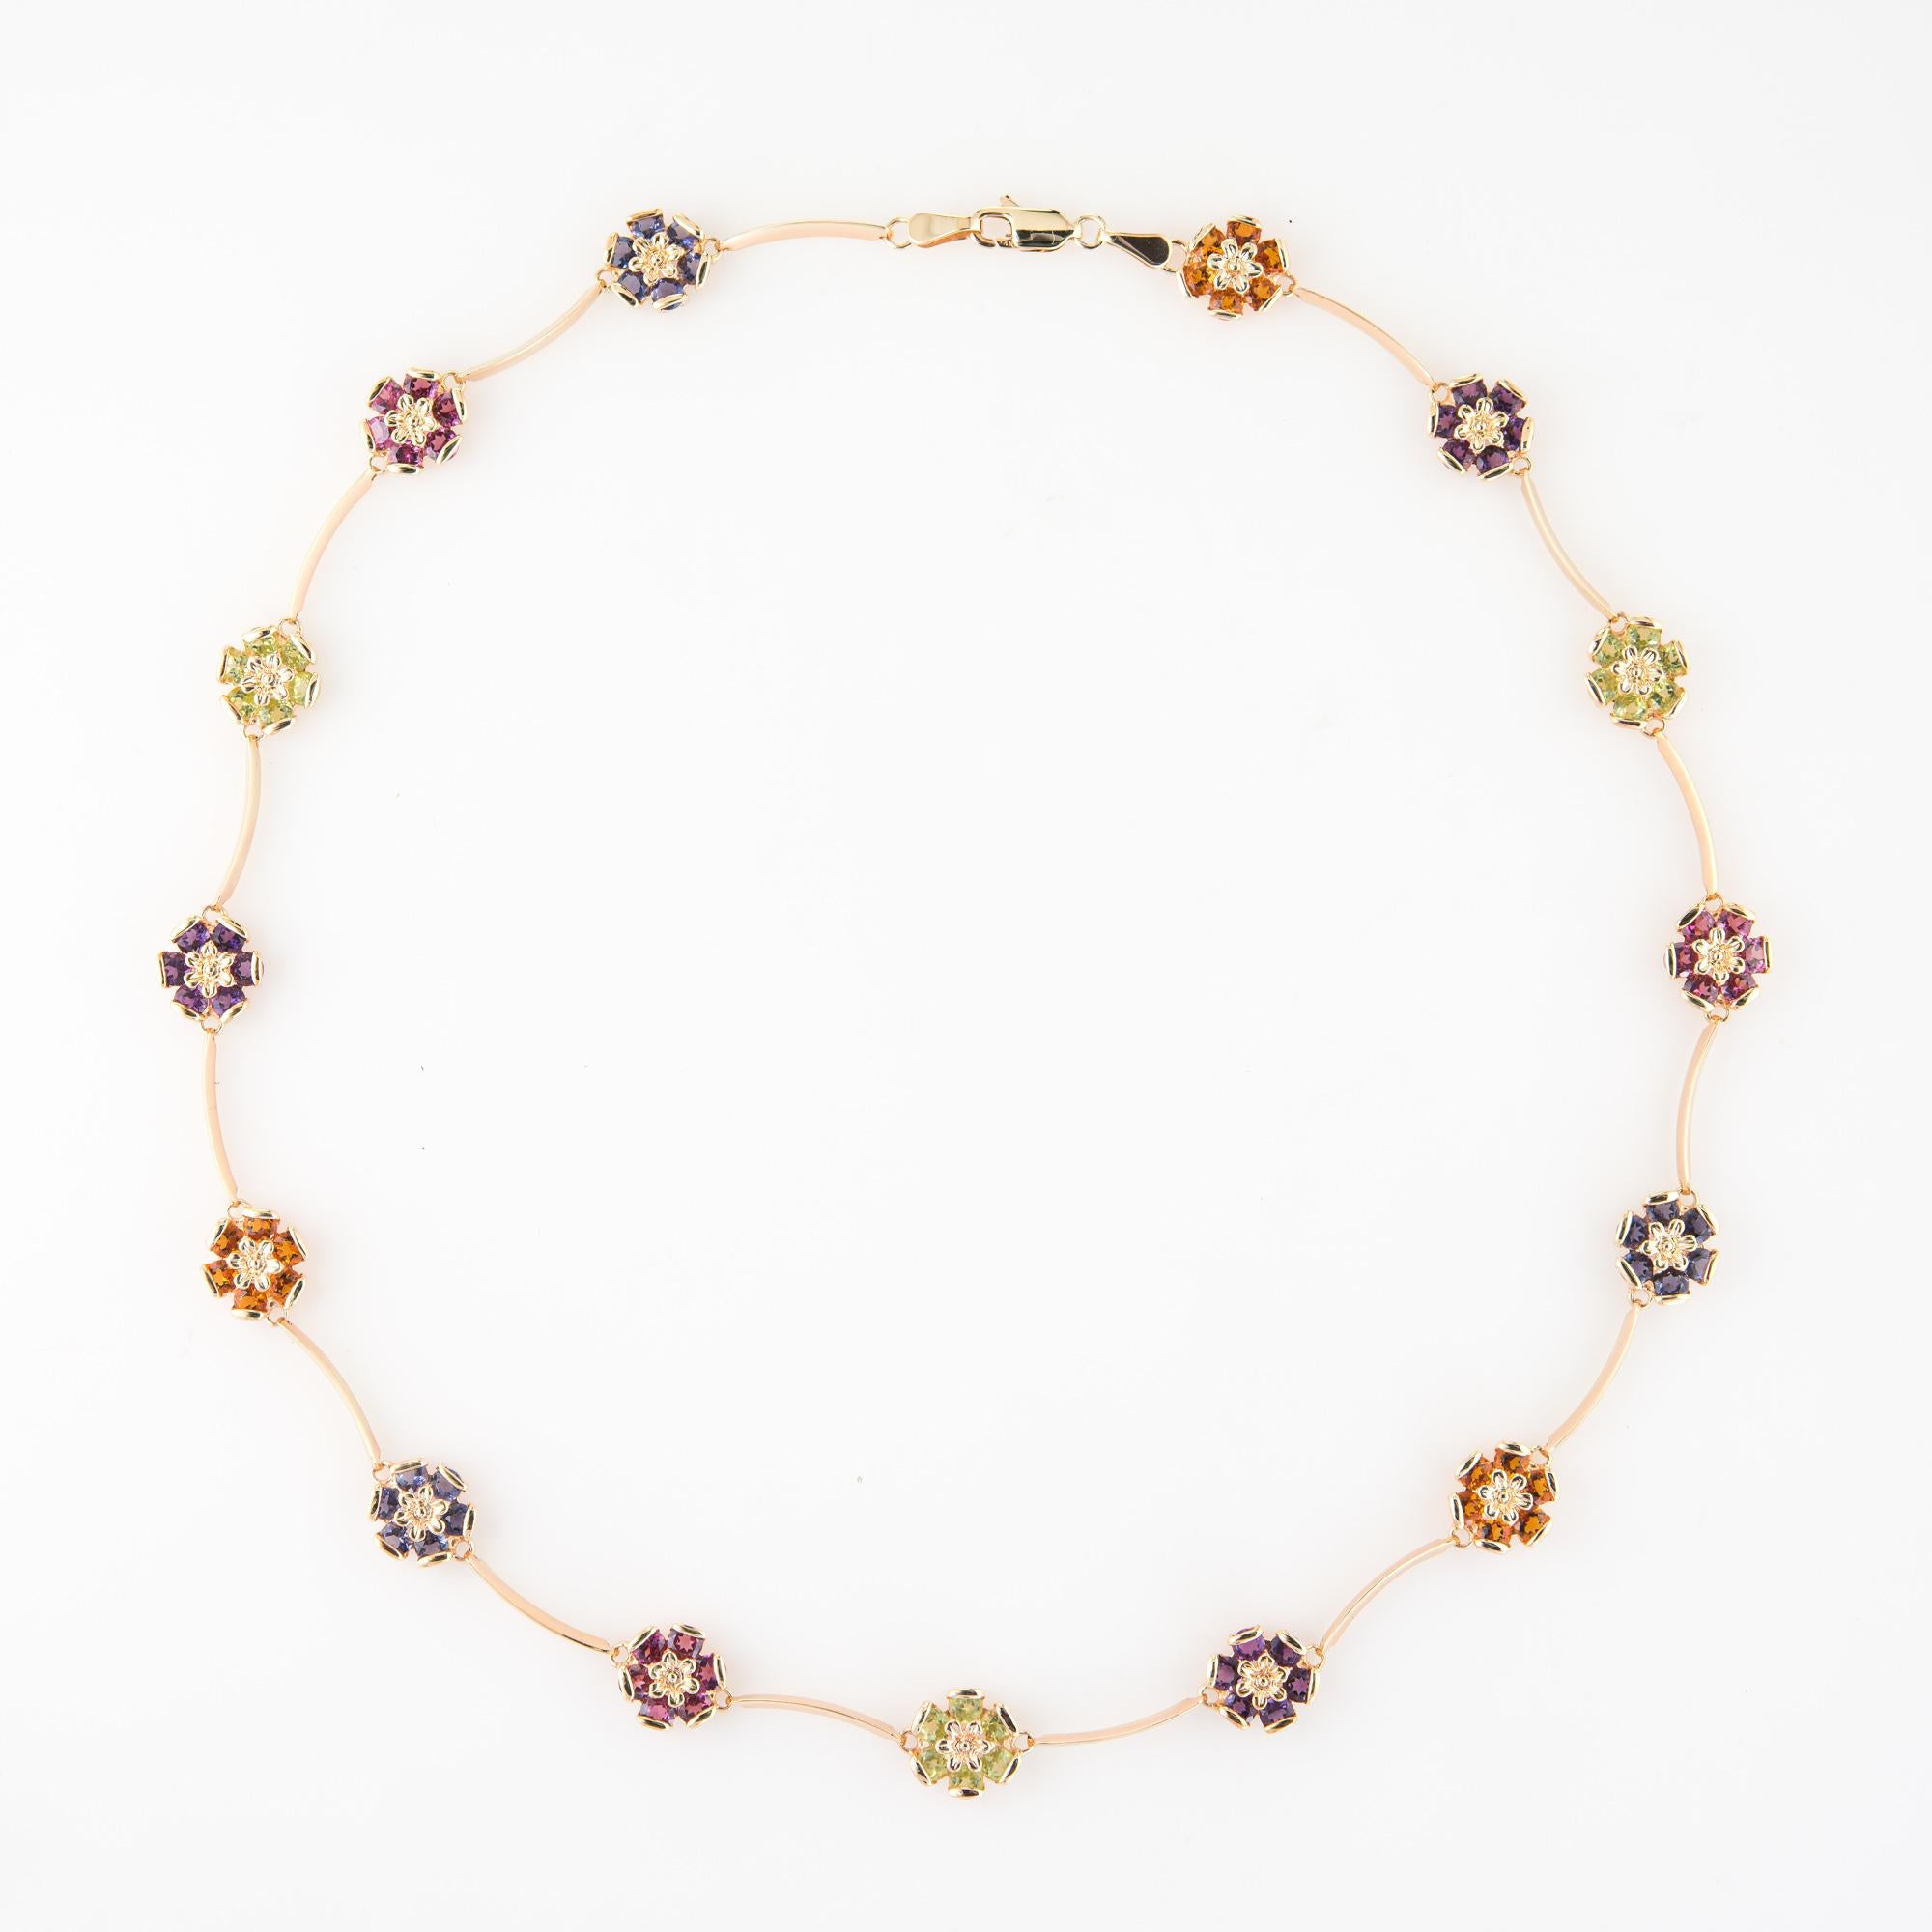 Elegant and finely detailed vintage multi gemstone necklace, crafted in 14 karat yellow gold.  

Iolite, citrine, pink tourmaline, peridot & amethyst are set into flower clusters. Each of the stones is estimated at 0.10  carats (total weight is